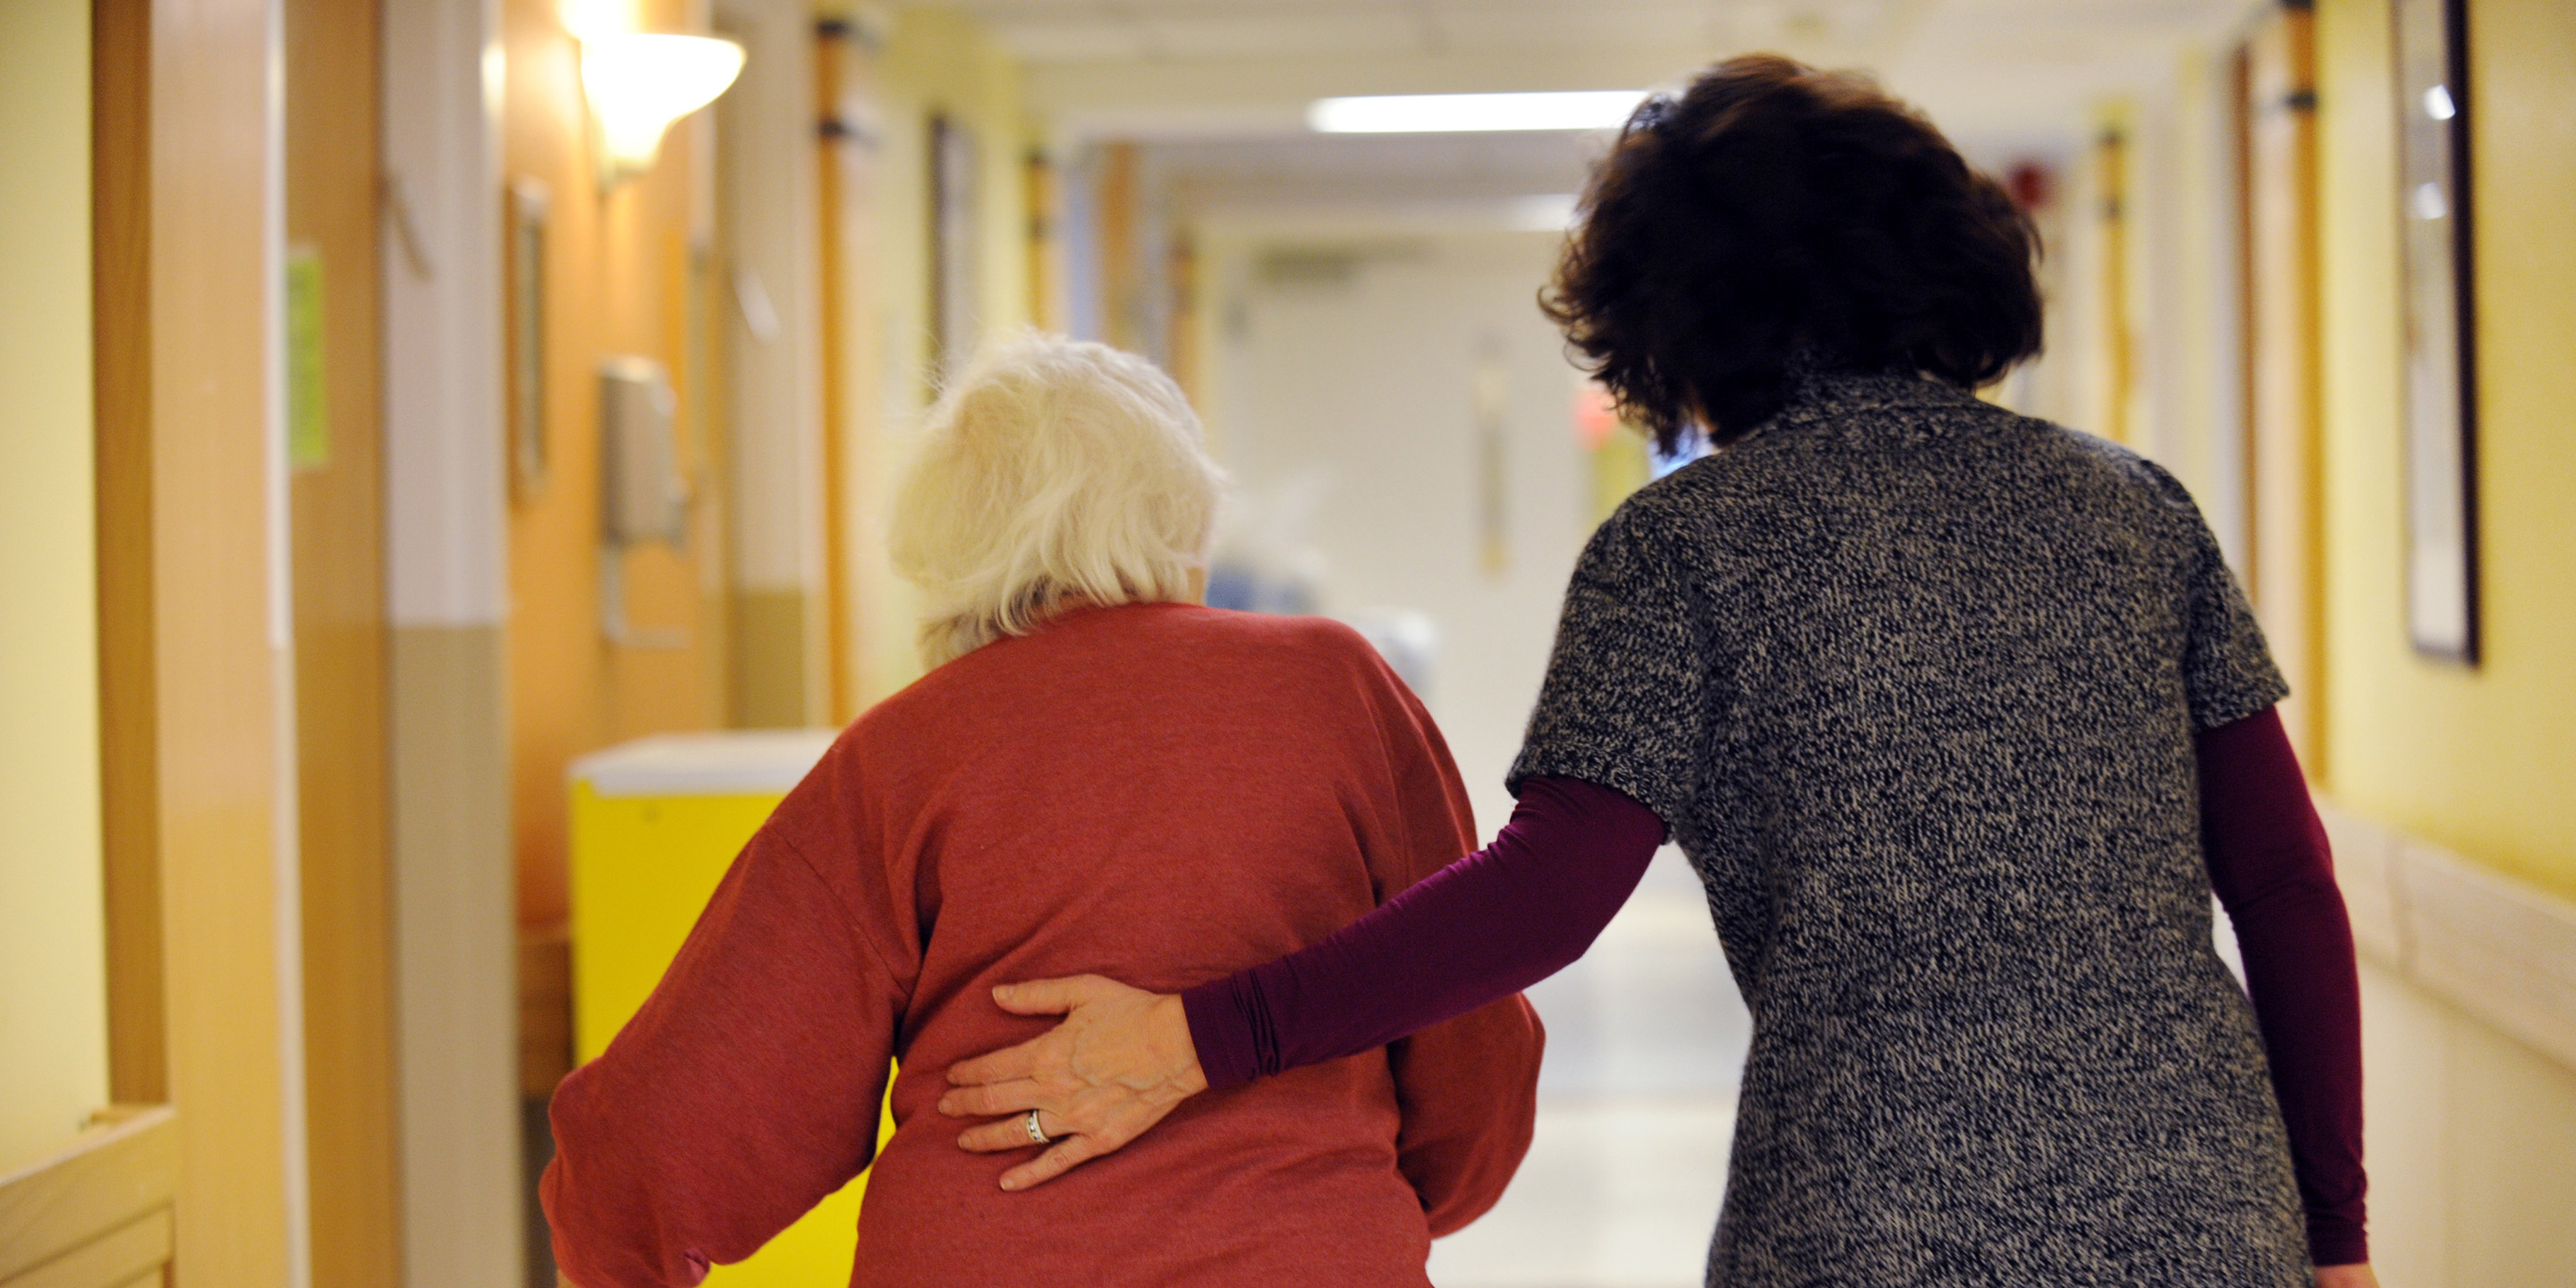 A woman guides a resident using a walker down a hallway.